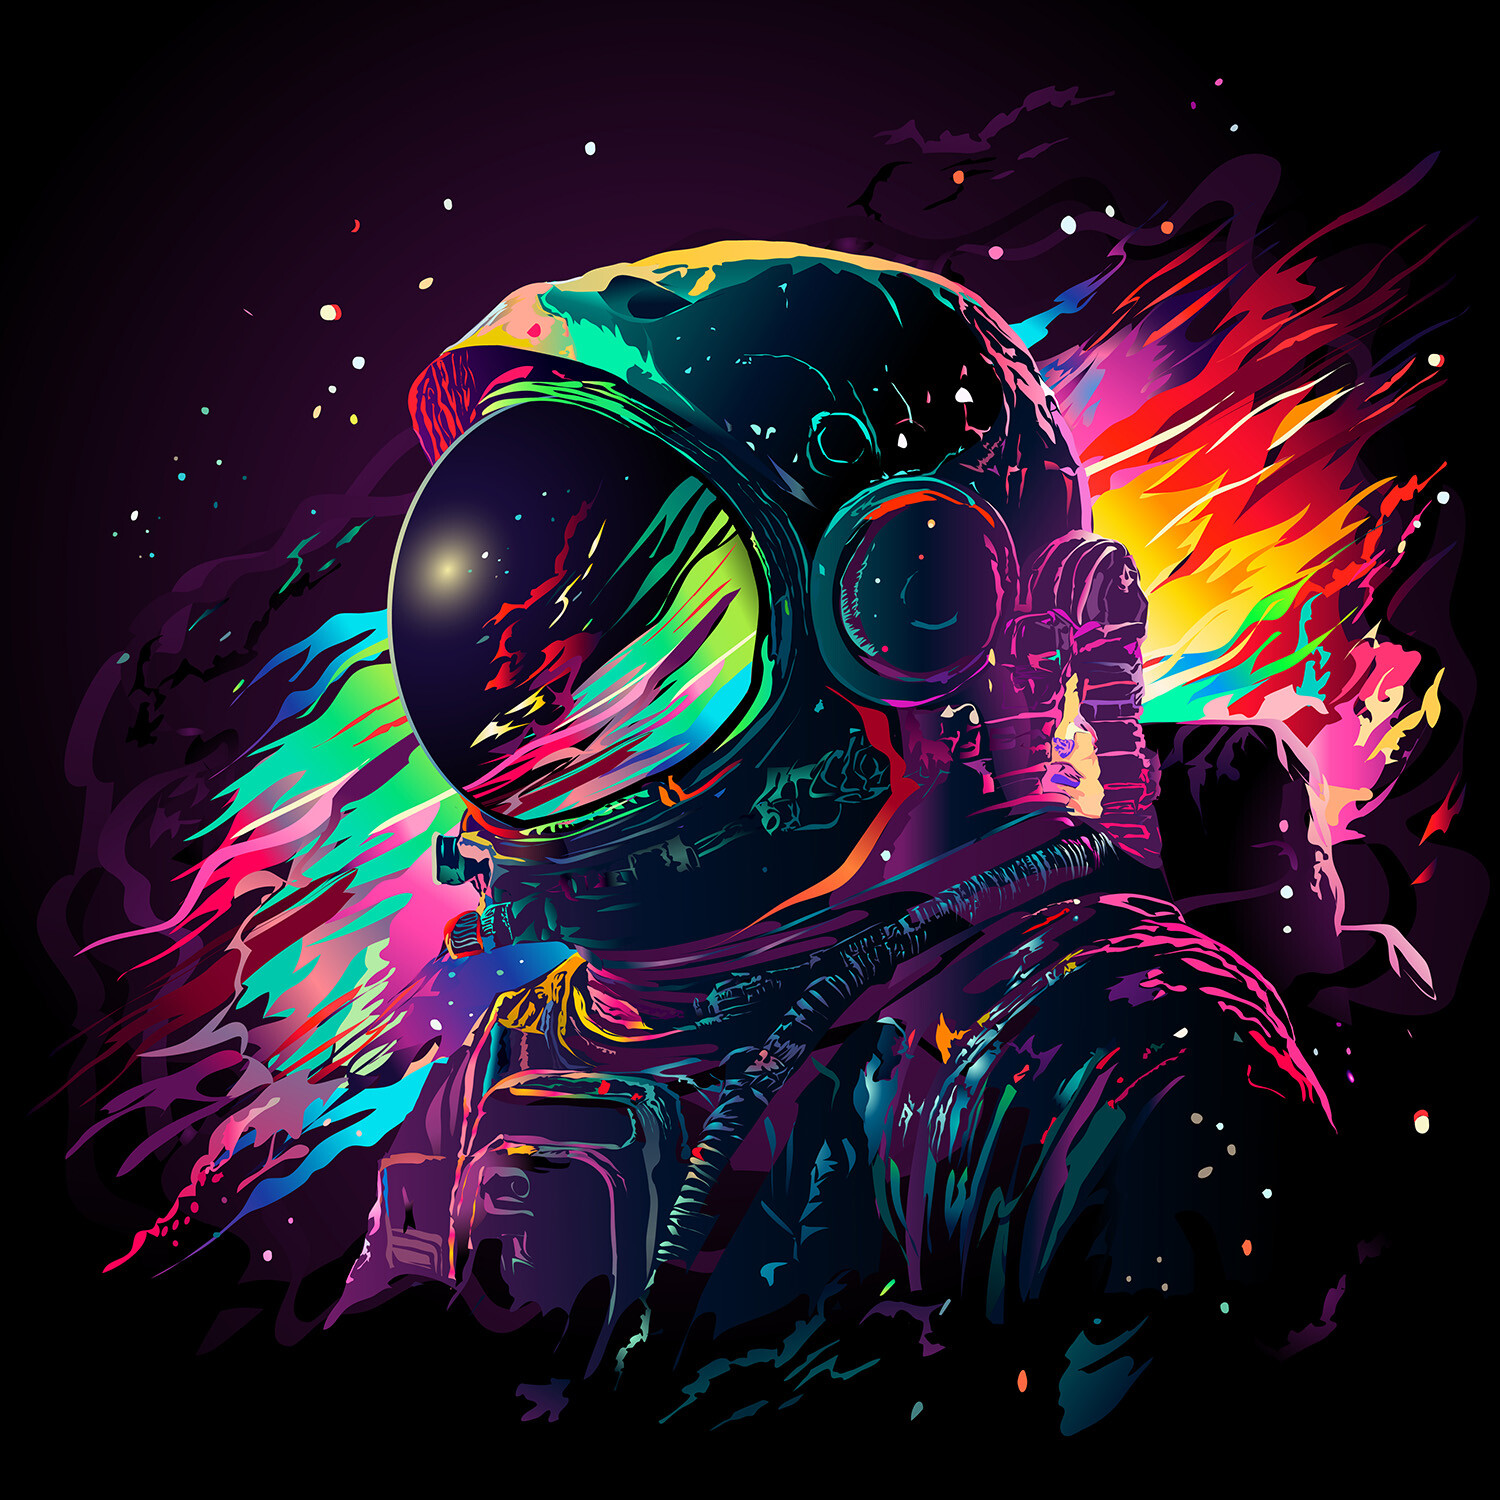 Wallpaper Astronaut Amoled Art Darkness Space Background  Download  Free Image